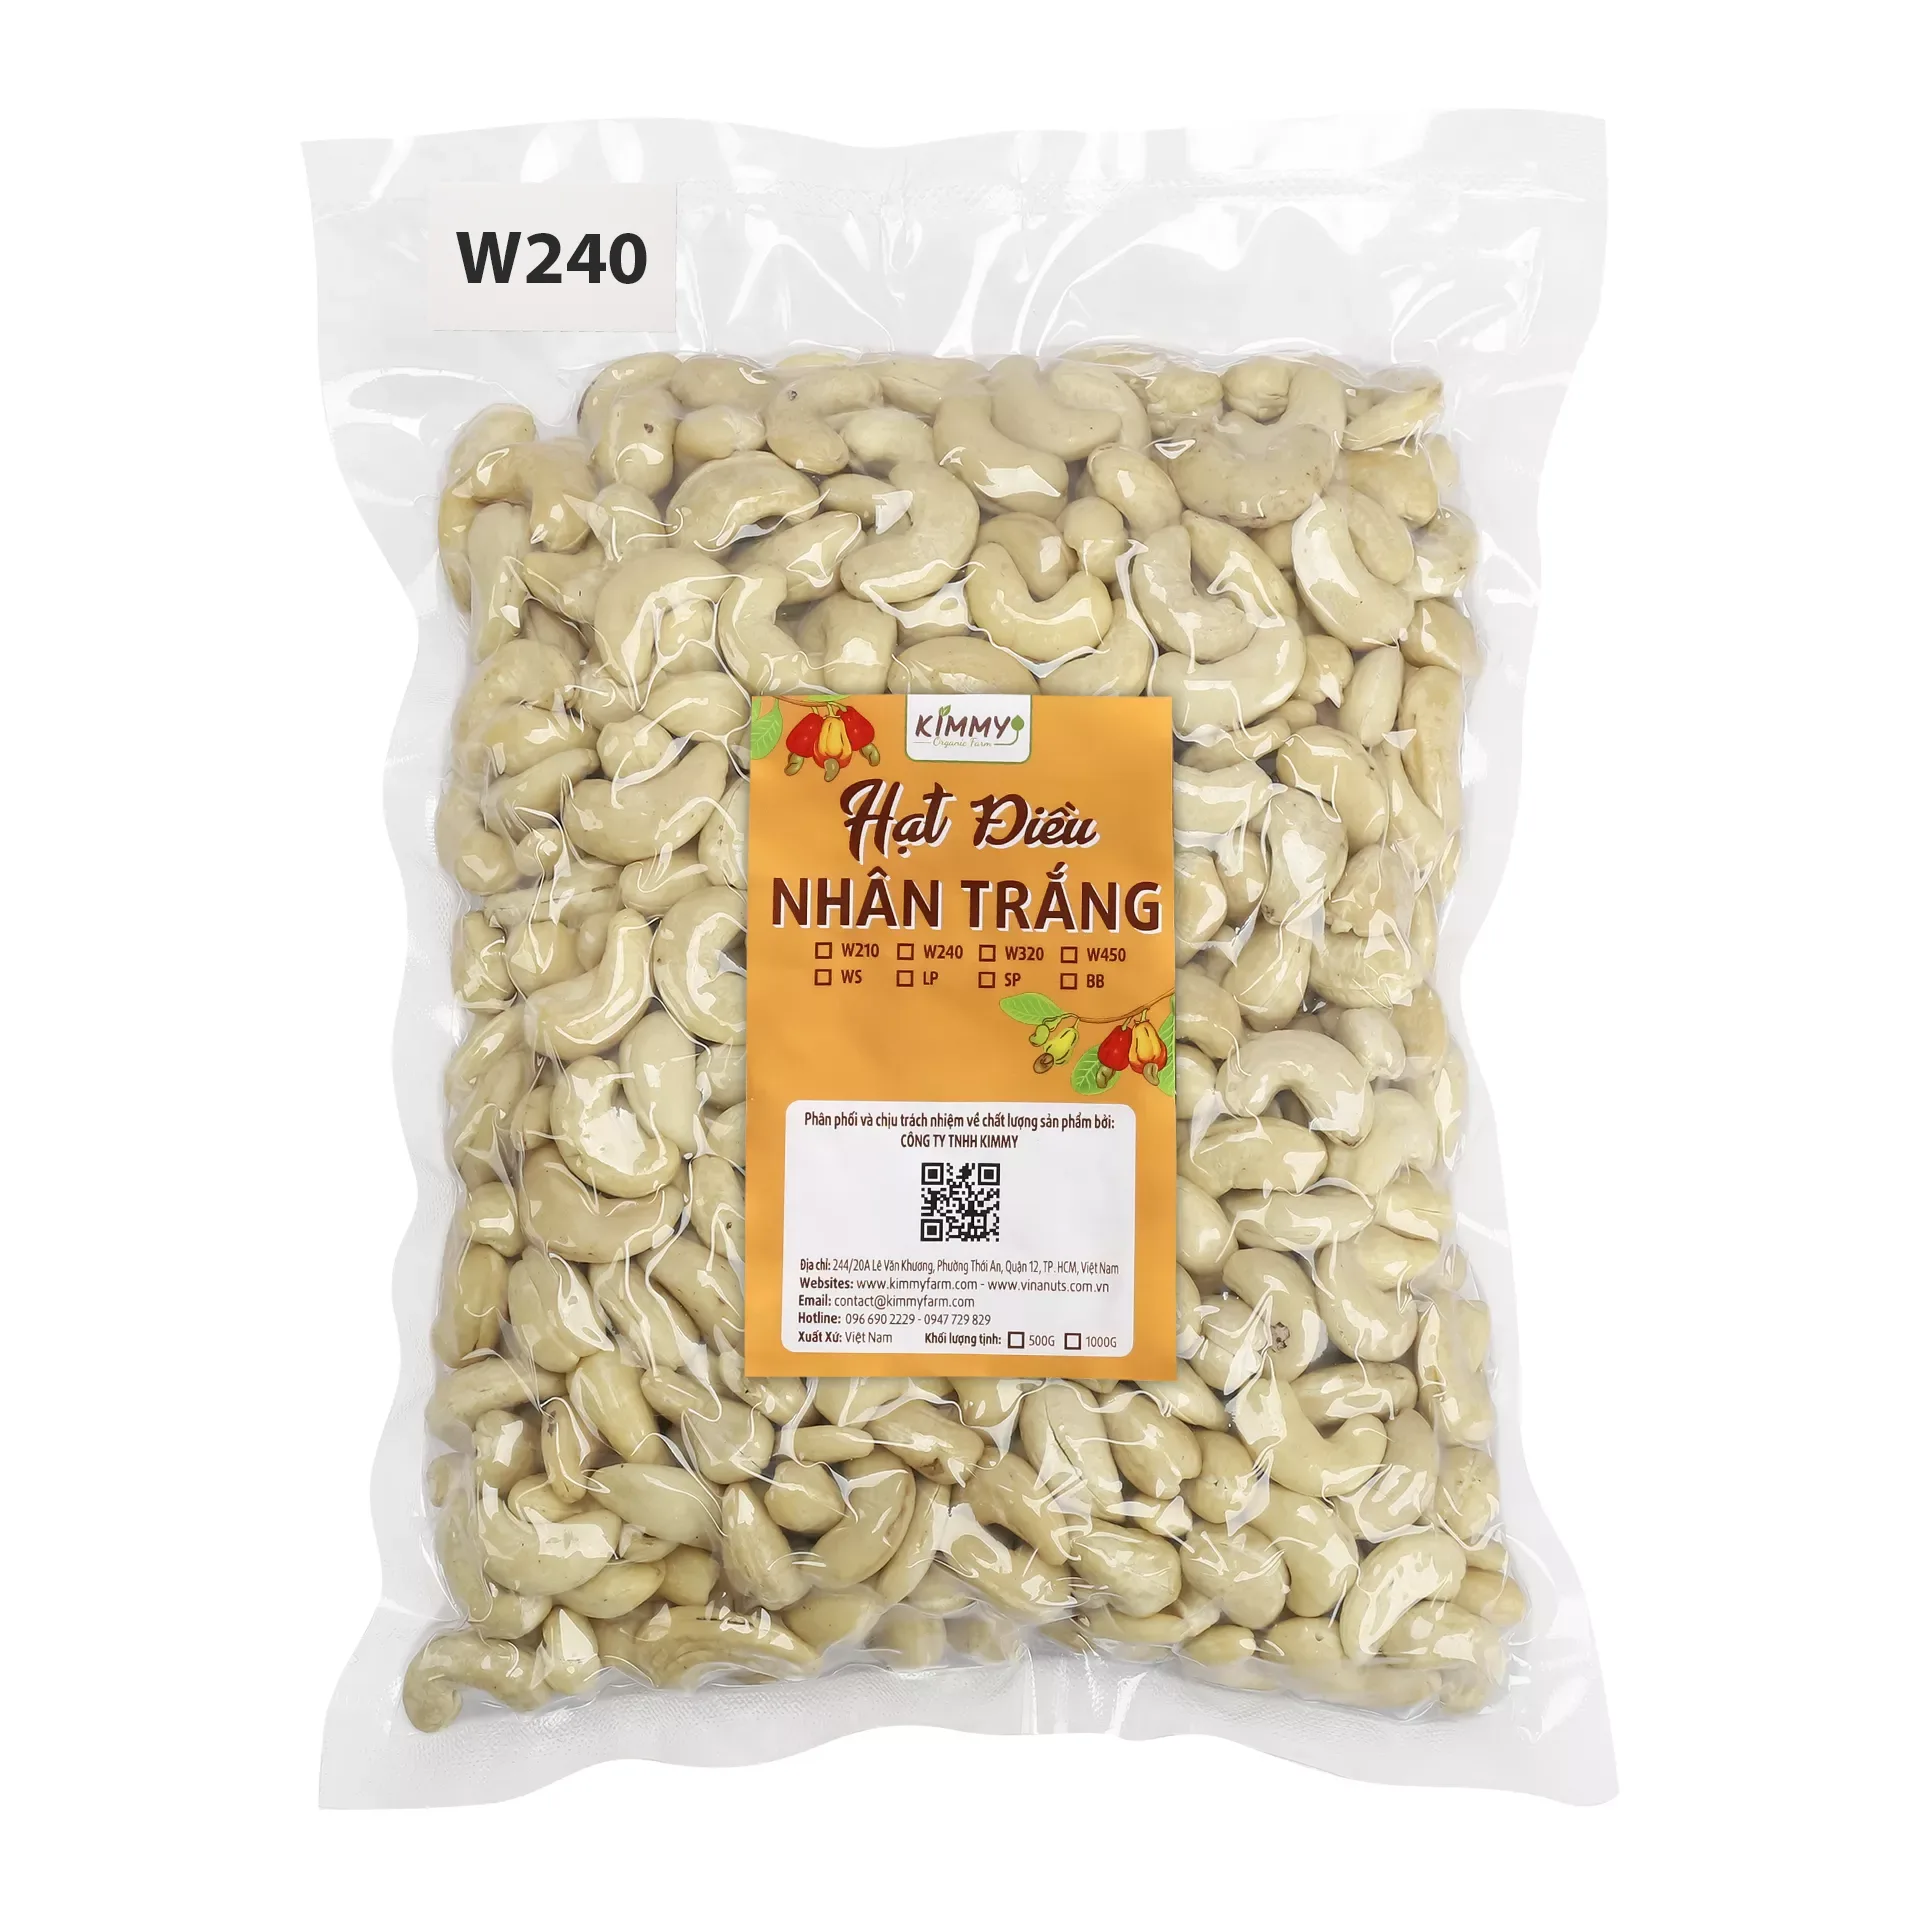 W240 Cashew Nuts With 1st Quality In Vietnam - Packed 1KG Vaccum Bag! 